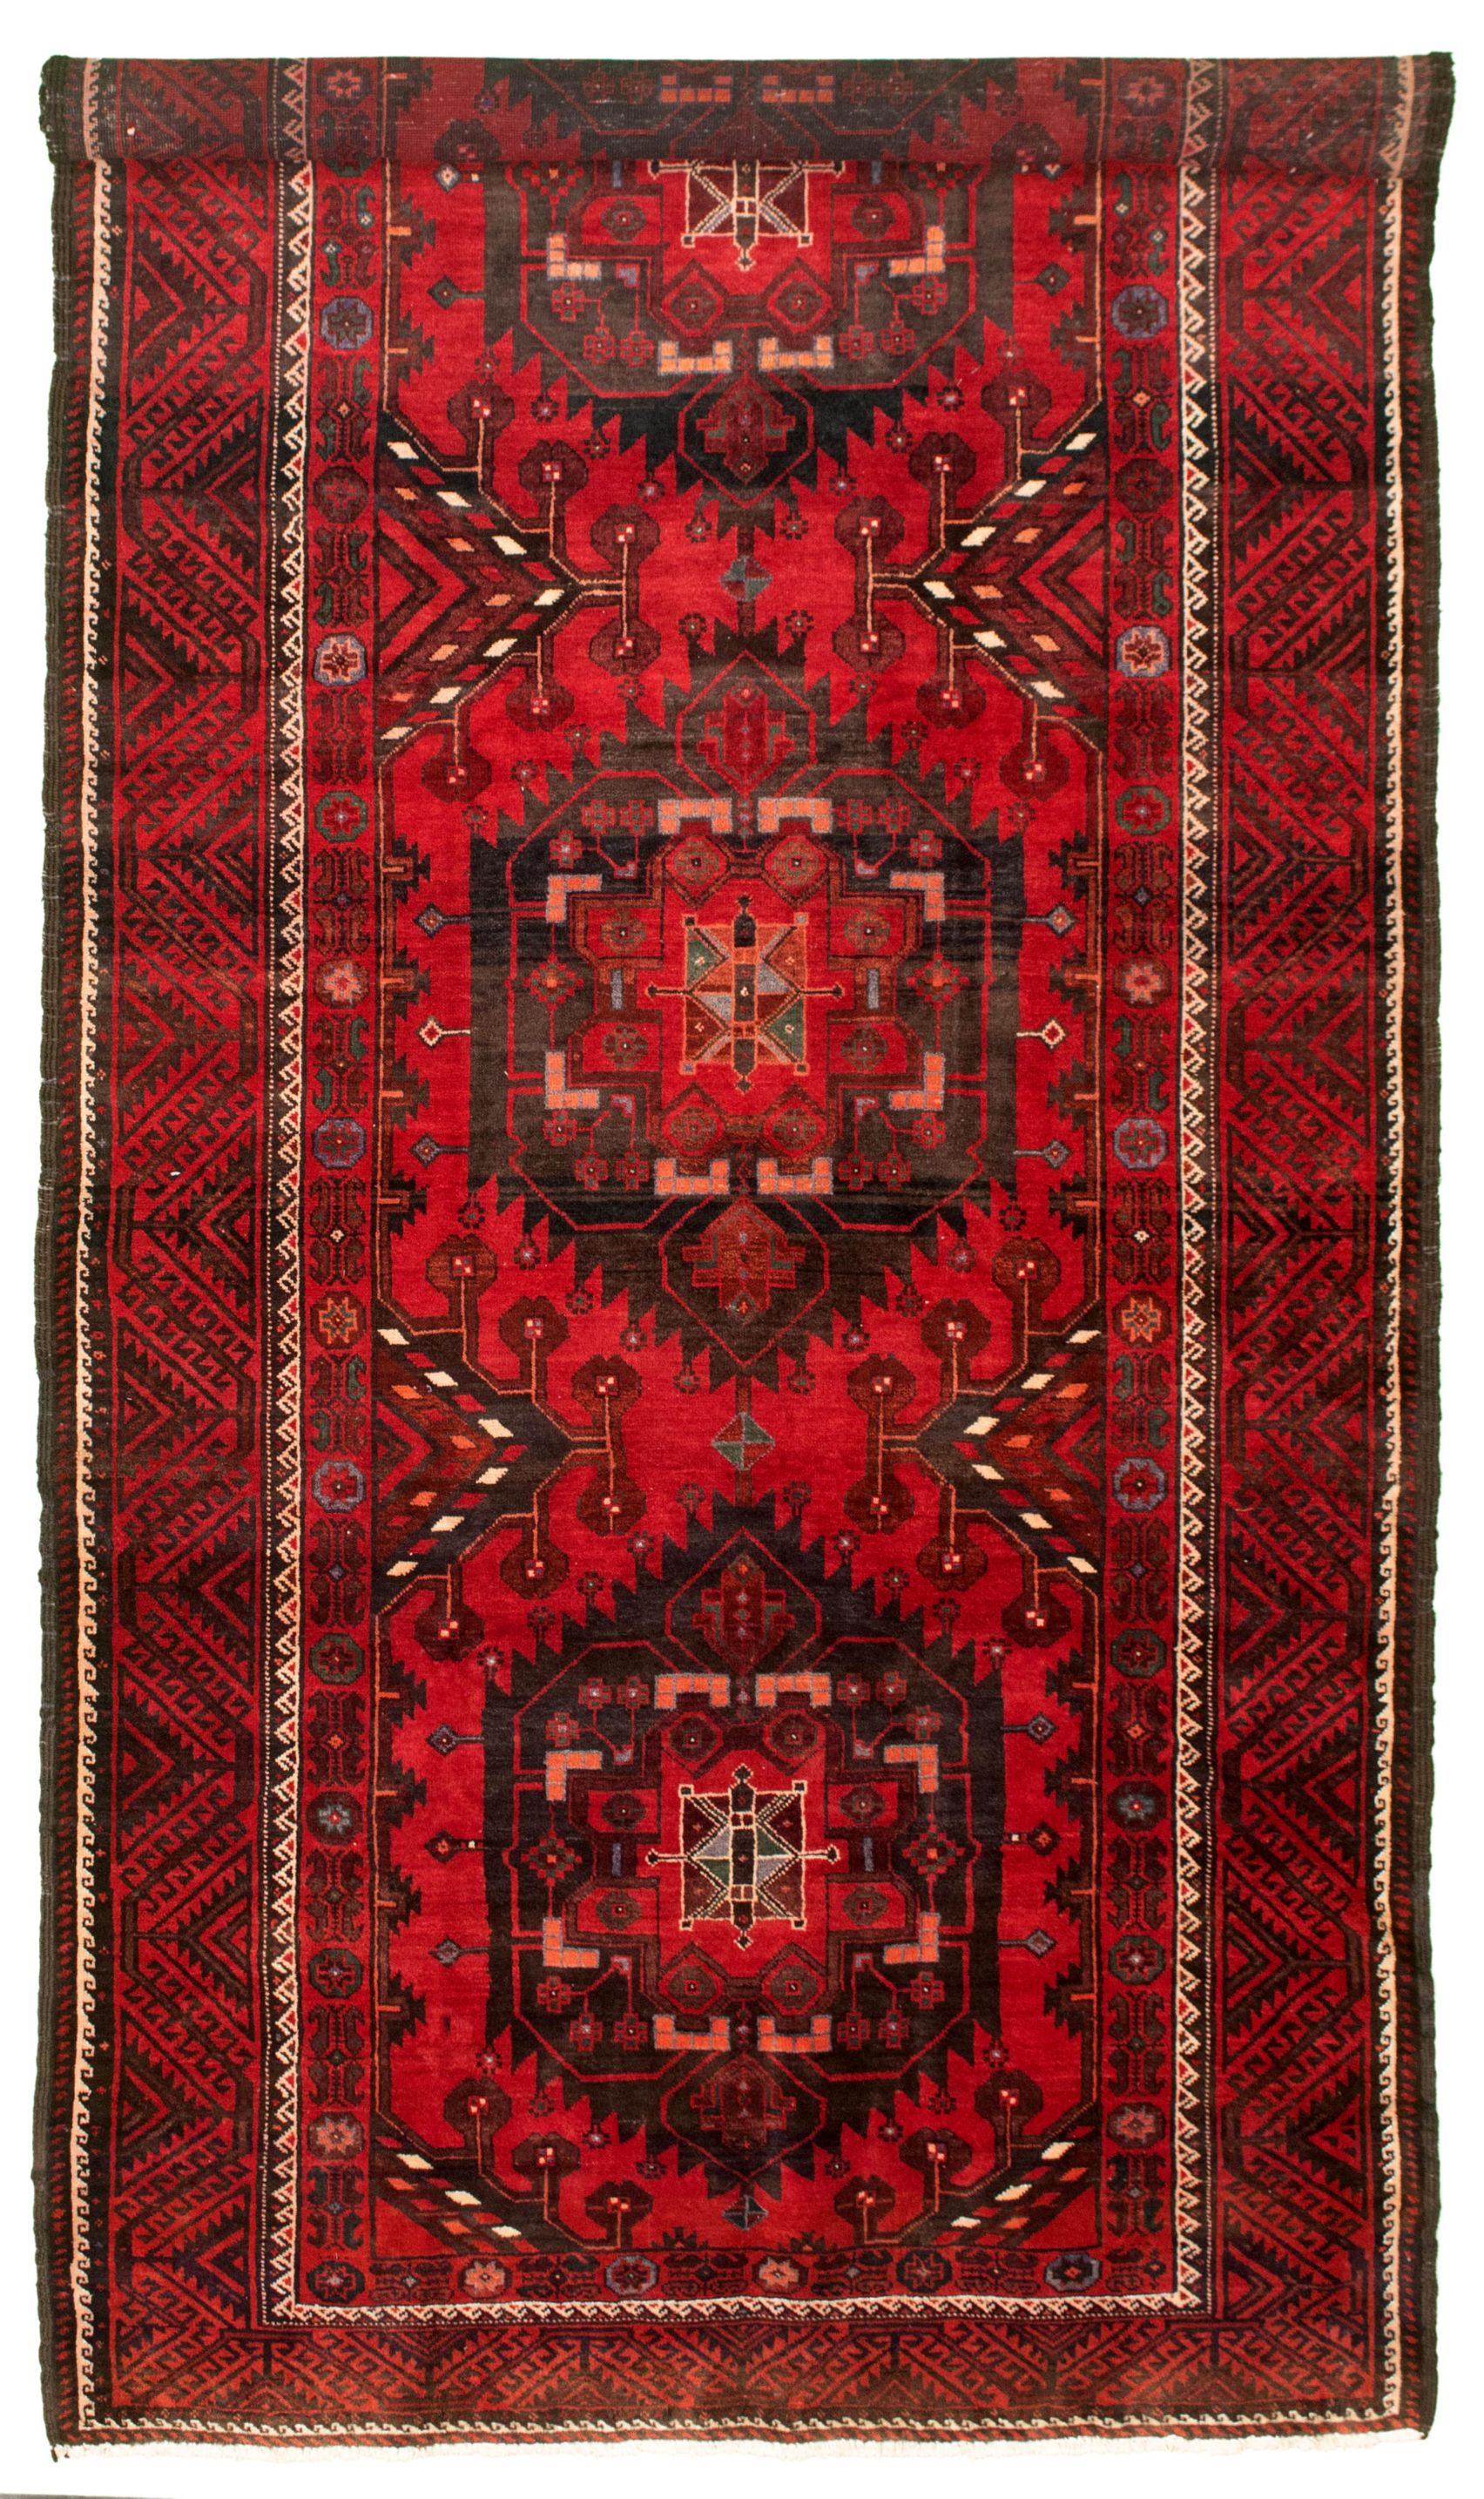 Hand-knotted Authentic Turkish Red Wool Rug 5'2" x 11'2"  Size: 5'2" x 11'2"  